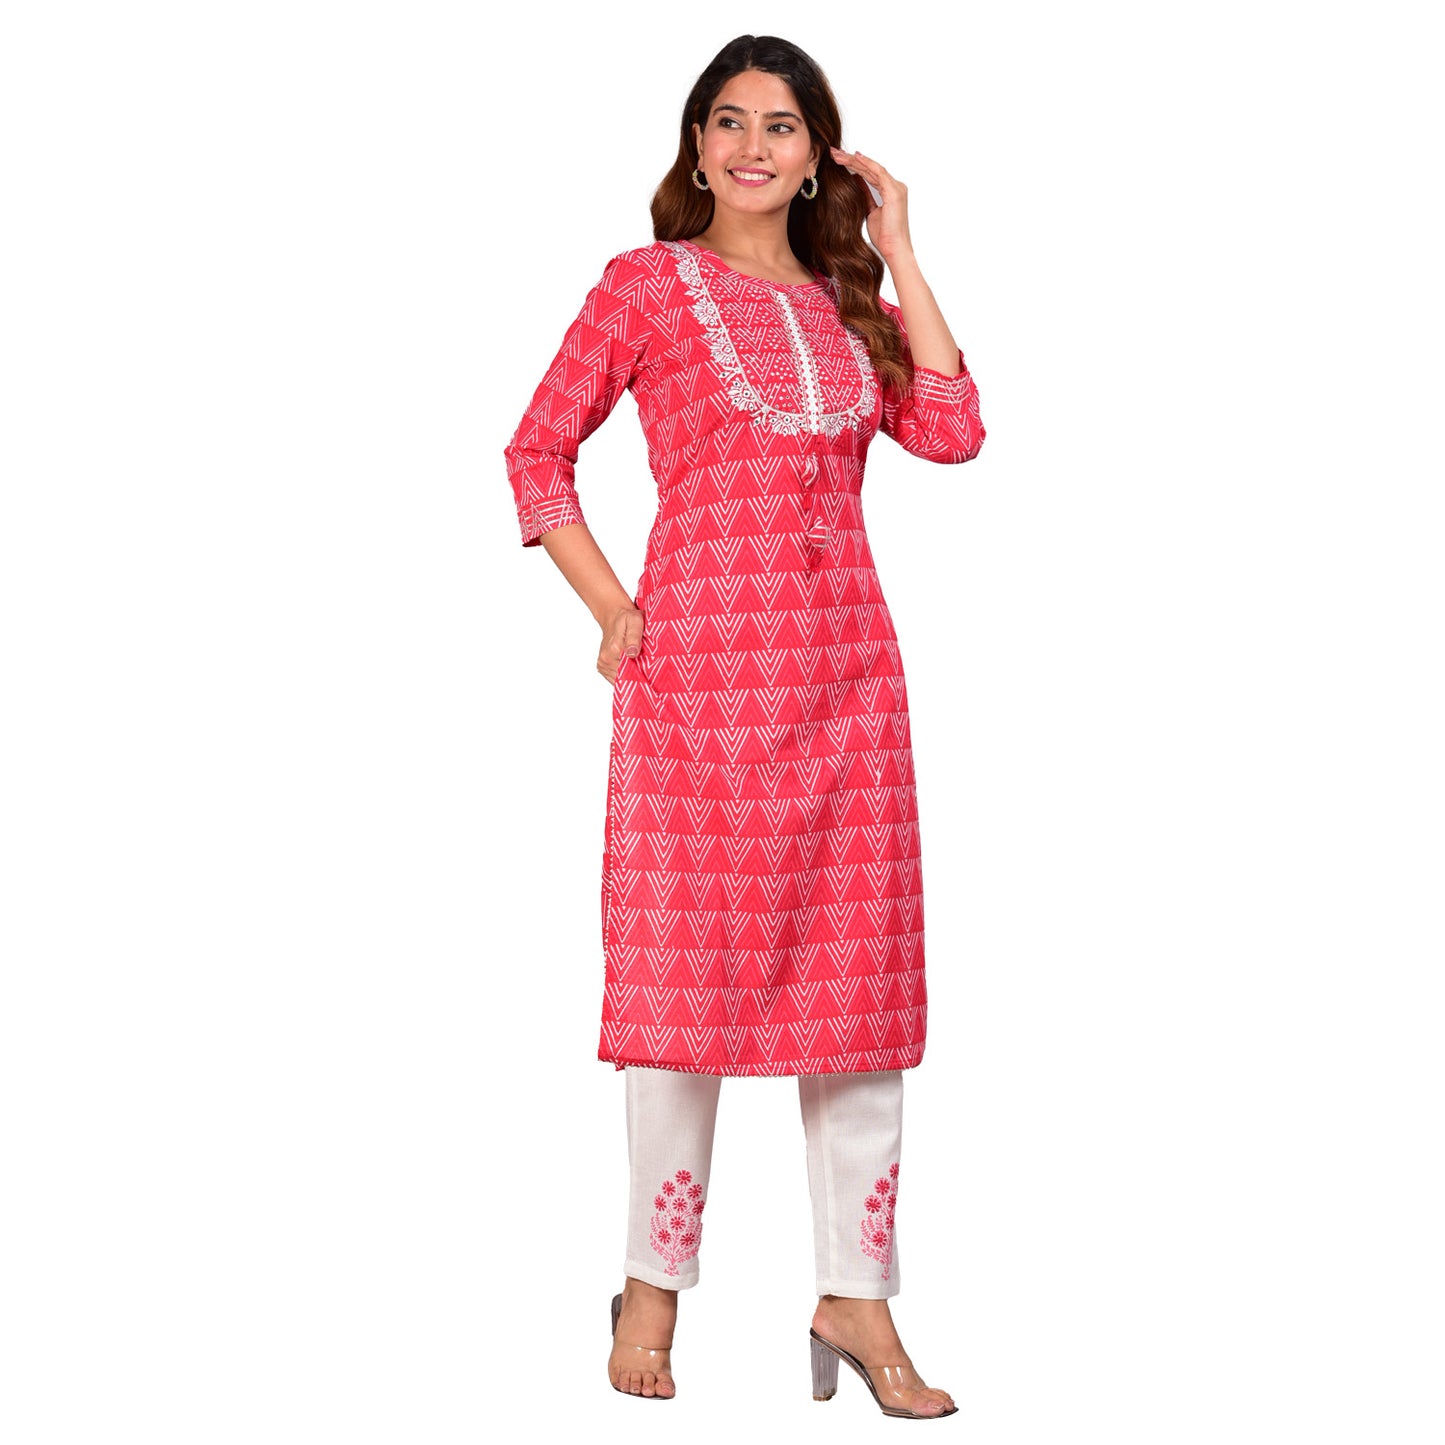 Yash Gallery Women's Embroidered Geomatrical Printed Straight Kurta with Floral Printed Pant and Dupatta (Red)